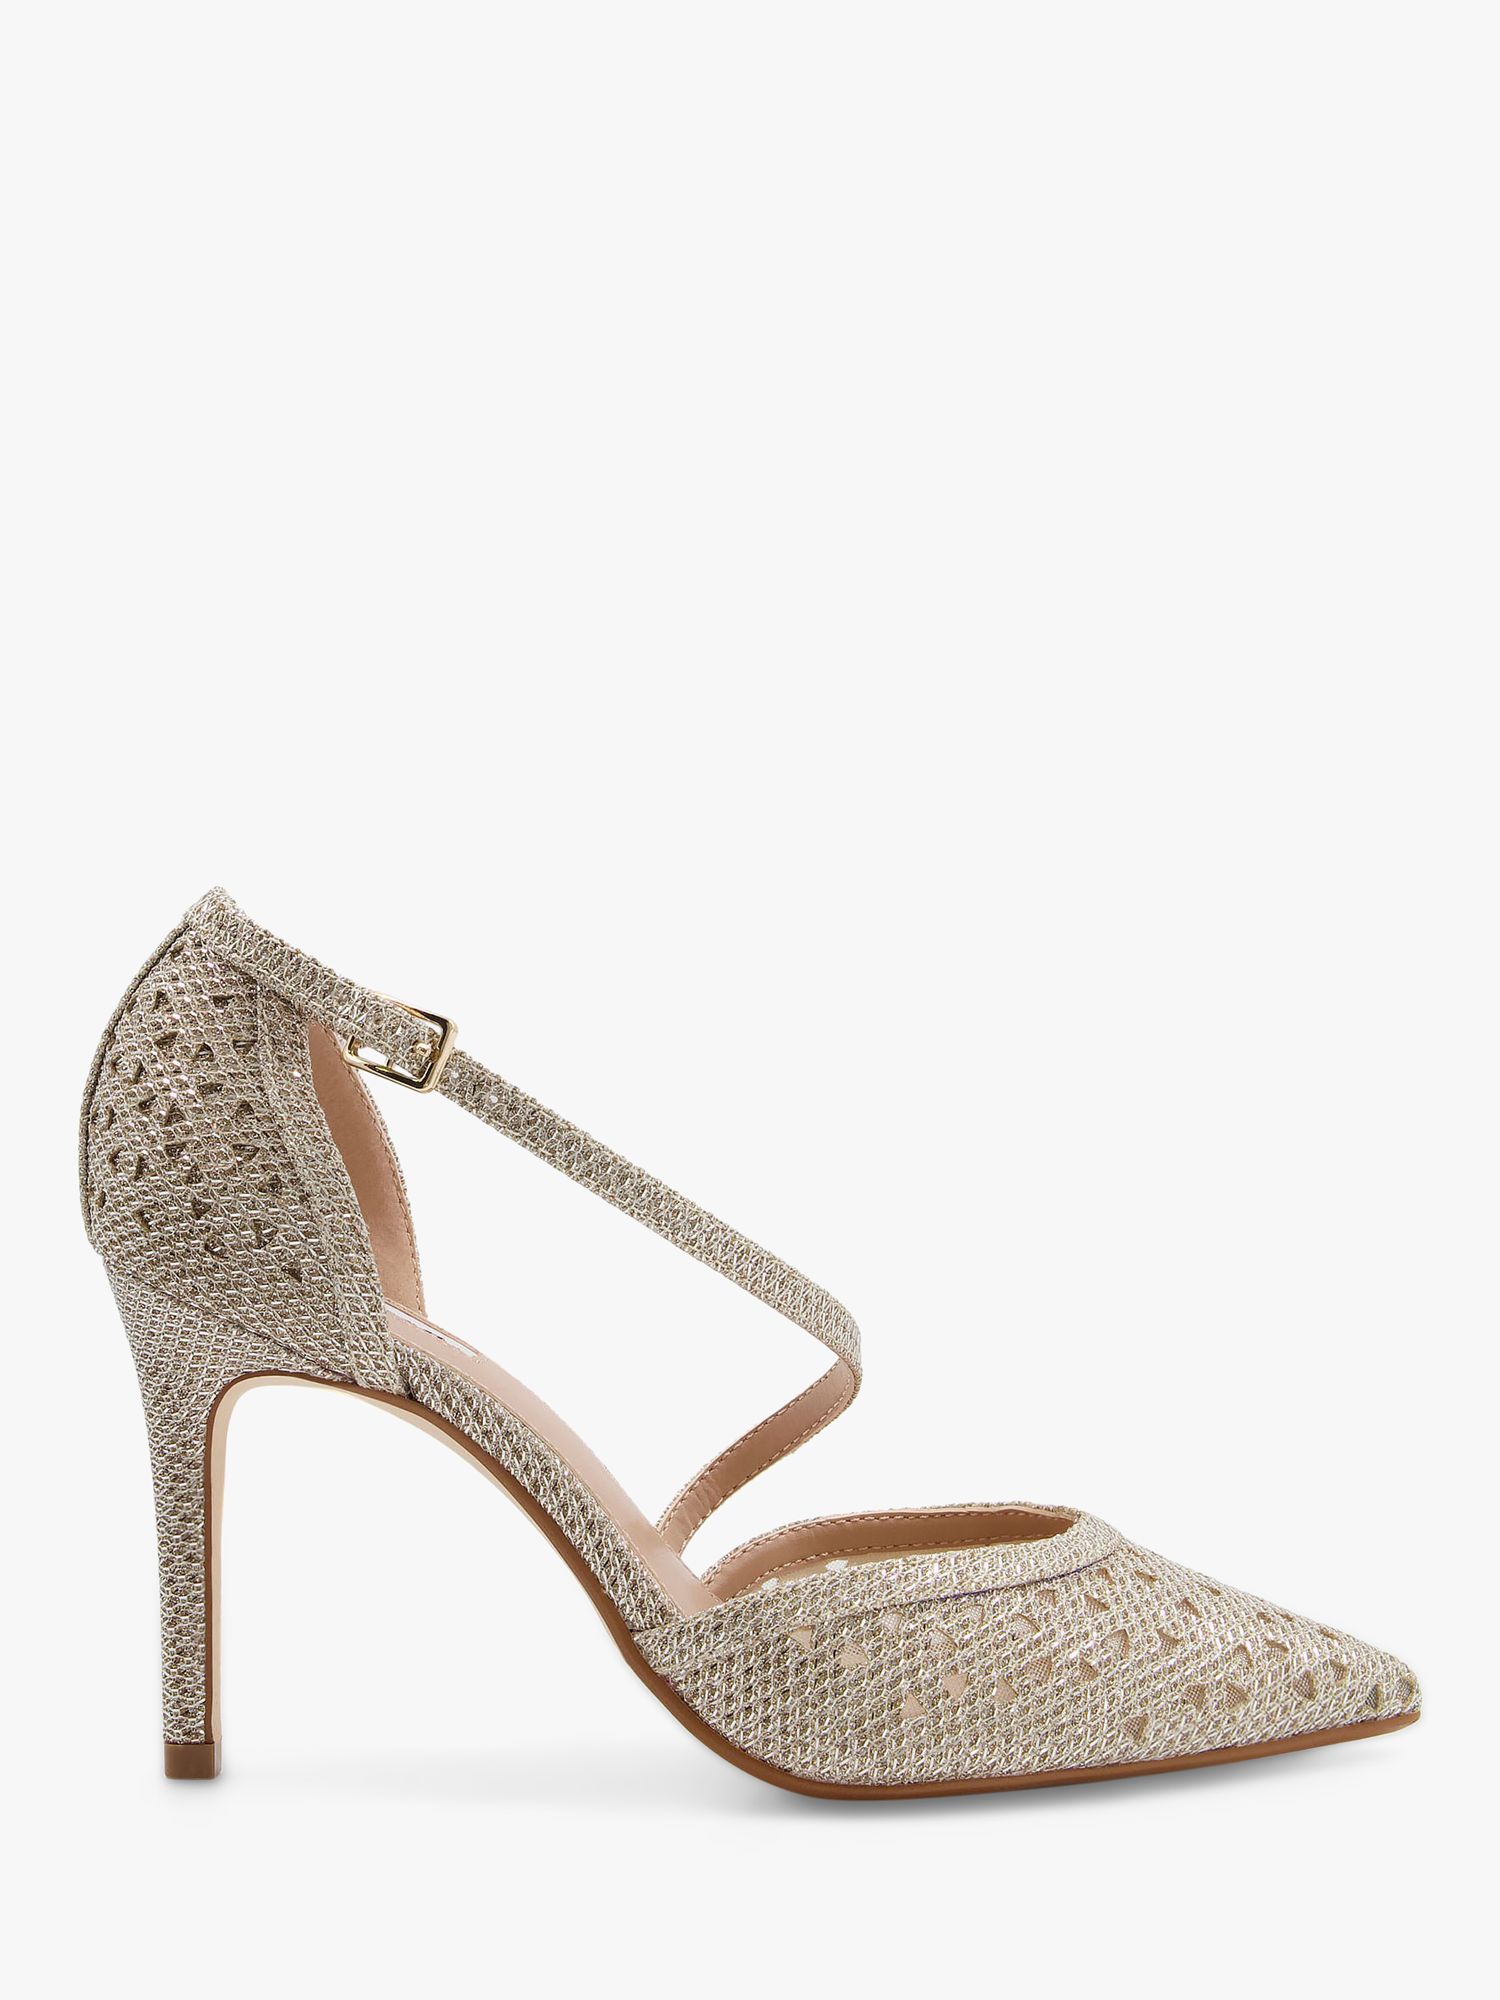 Dune Danae Wide Fit Pointed High Heels, Gold at John Lewis & Partners